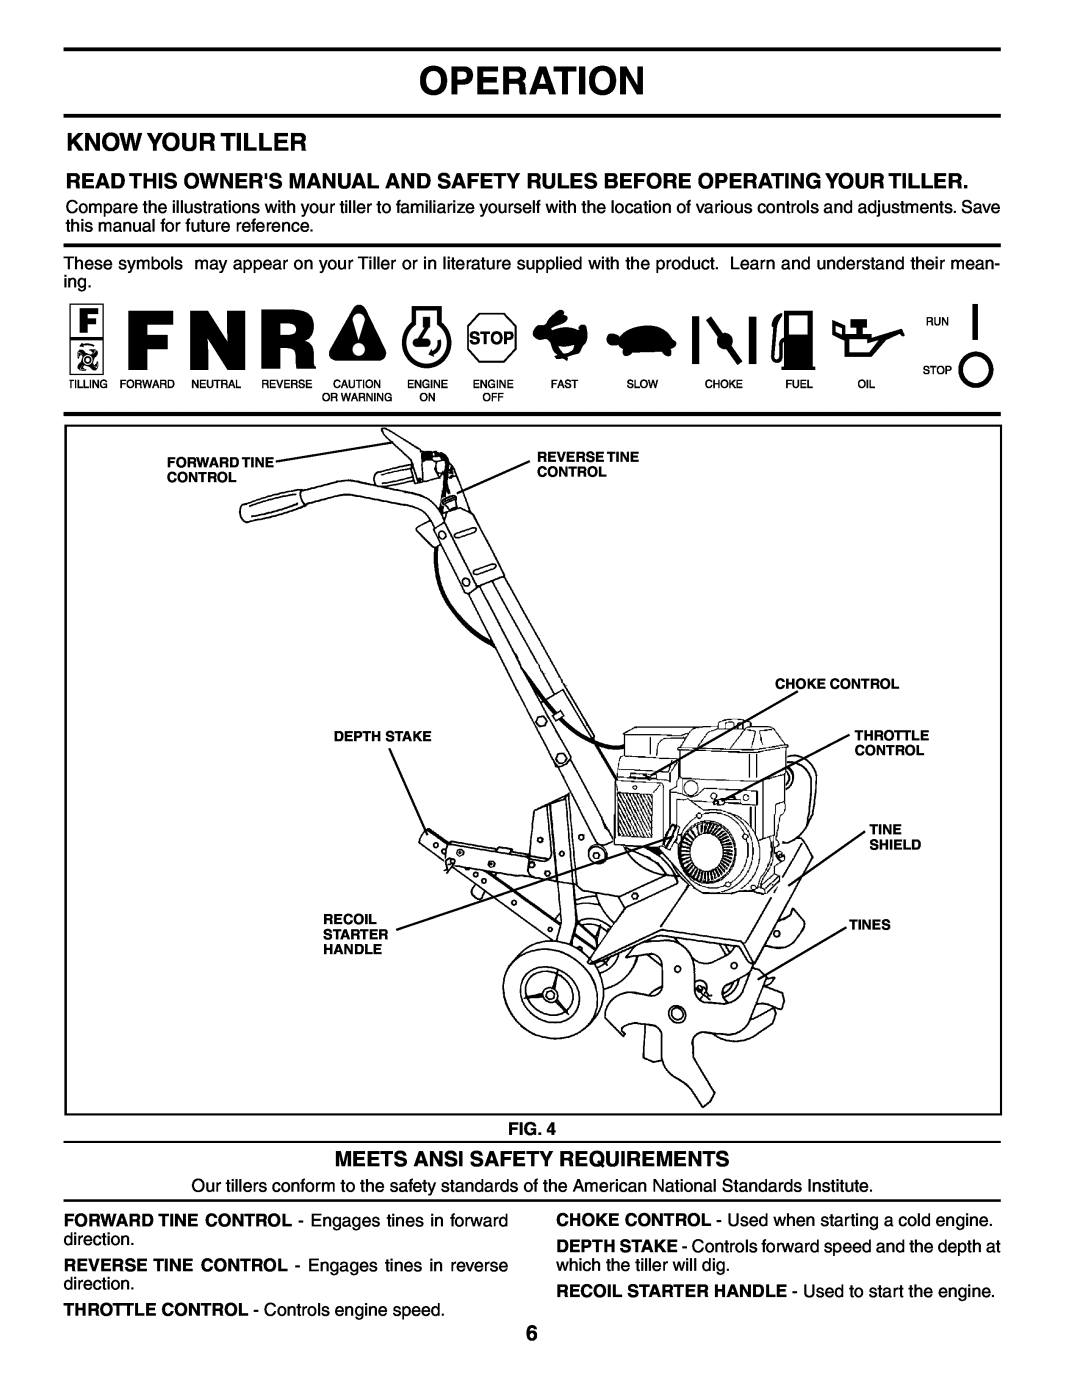 Poulan AGF550A owner manual Operation, Know Your Tiller, Meets Ansi Safety Requirements 